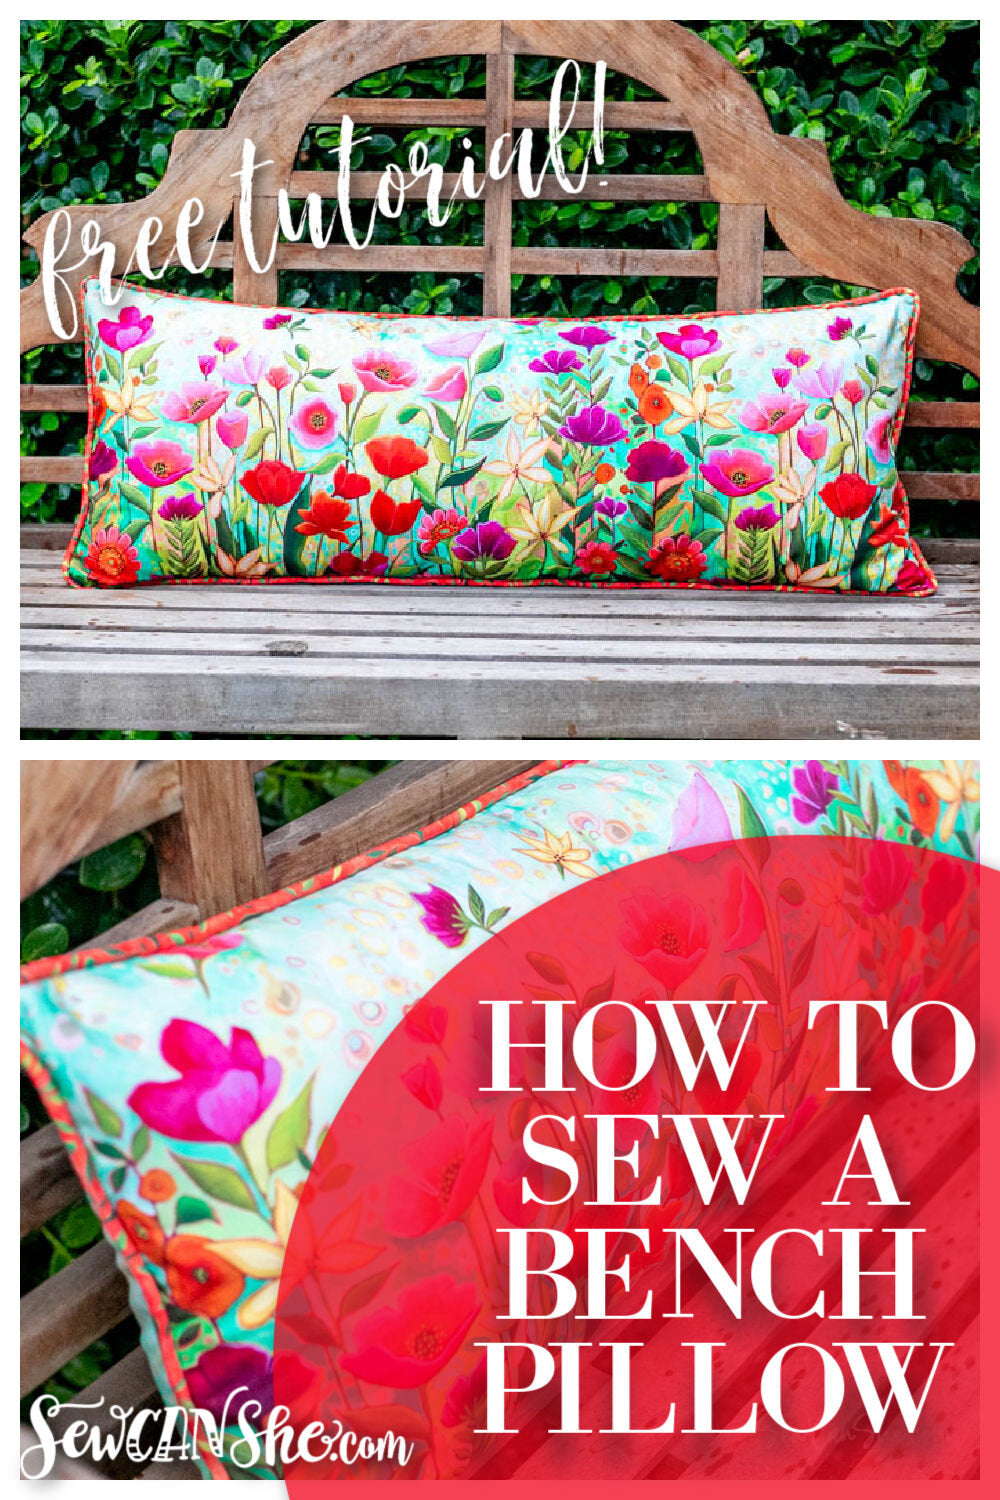 How to Sew a Bench Pillow - free bench cushion sewing tutorial! {with piping}